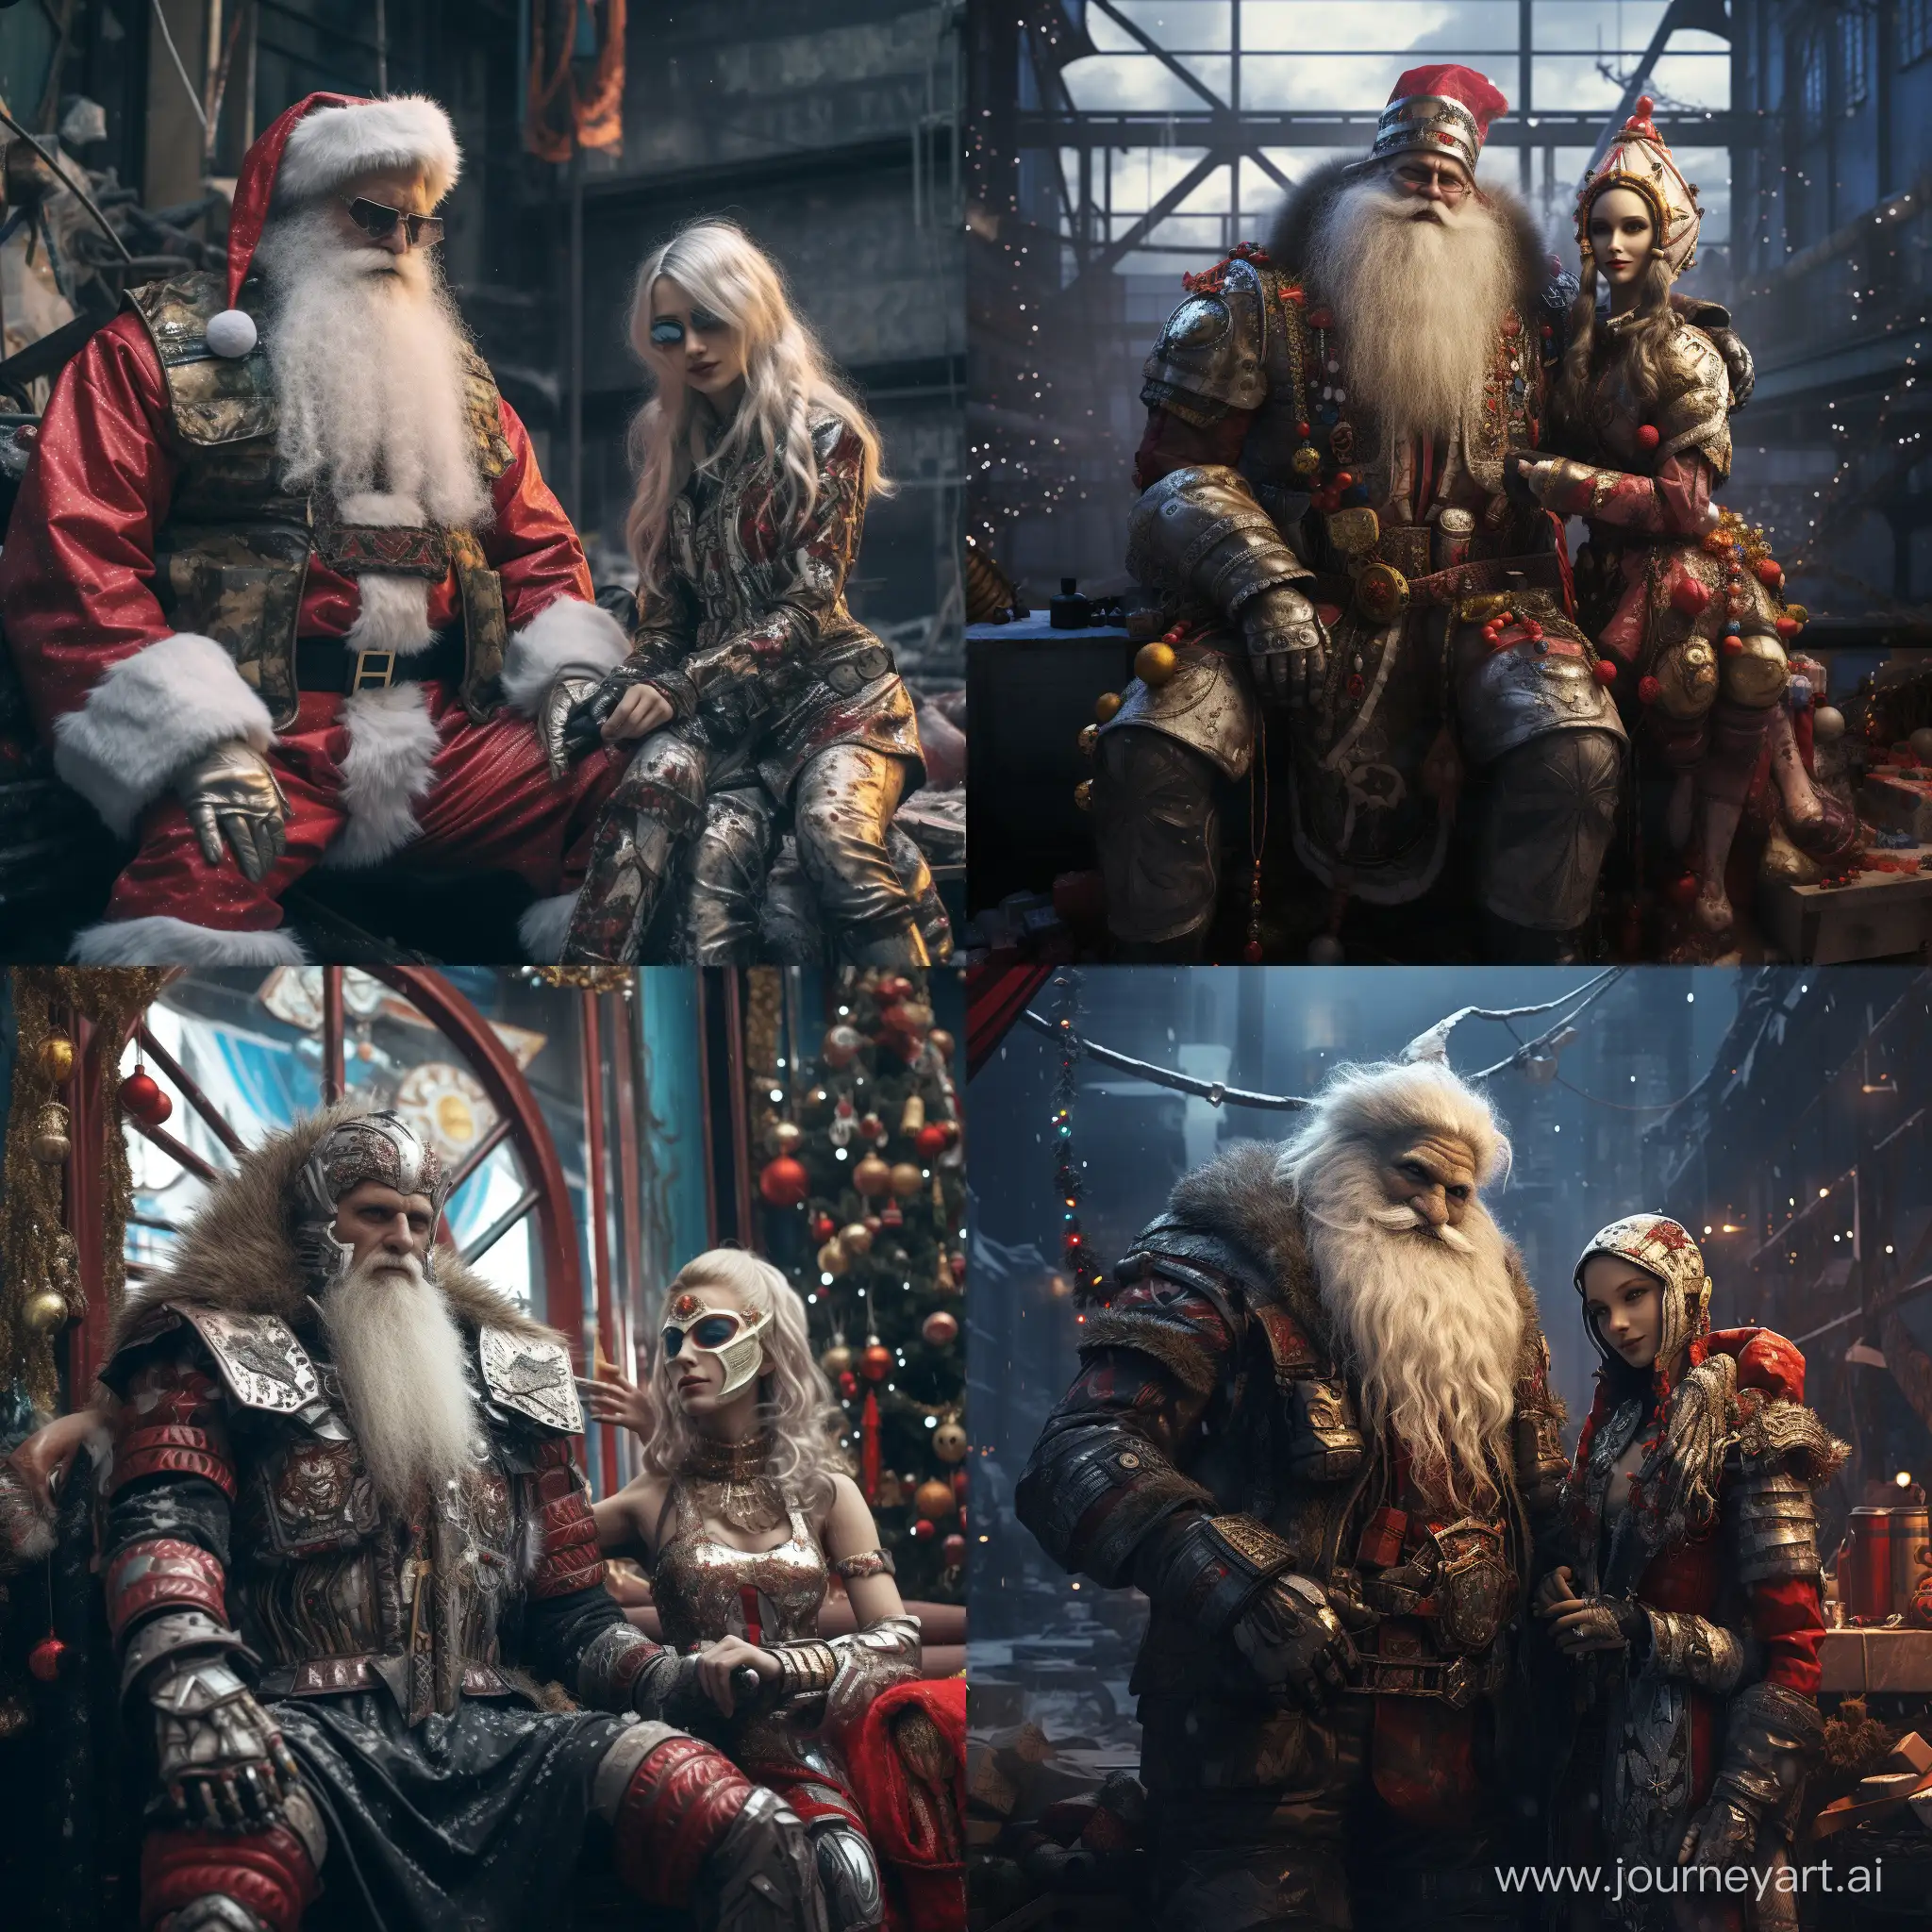 Cyberpunk-Ded-Moroz-and-Snegurochka-Deliver-Gifts-to-PostApocalyptic-New-Year-Tree